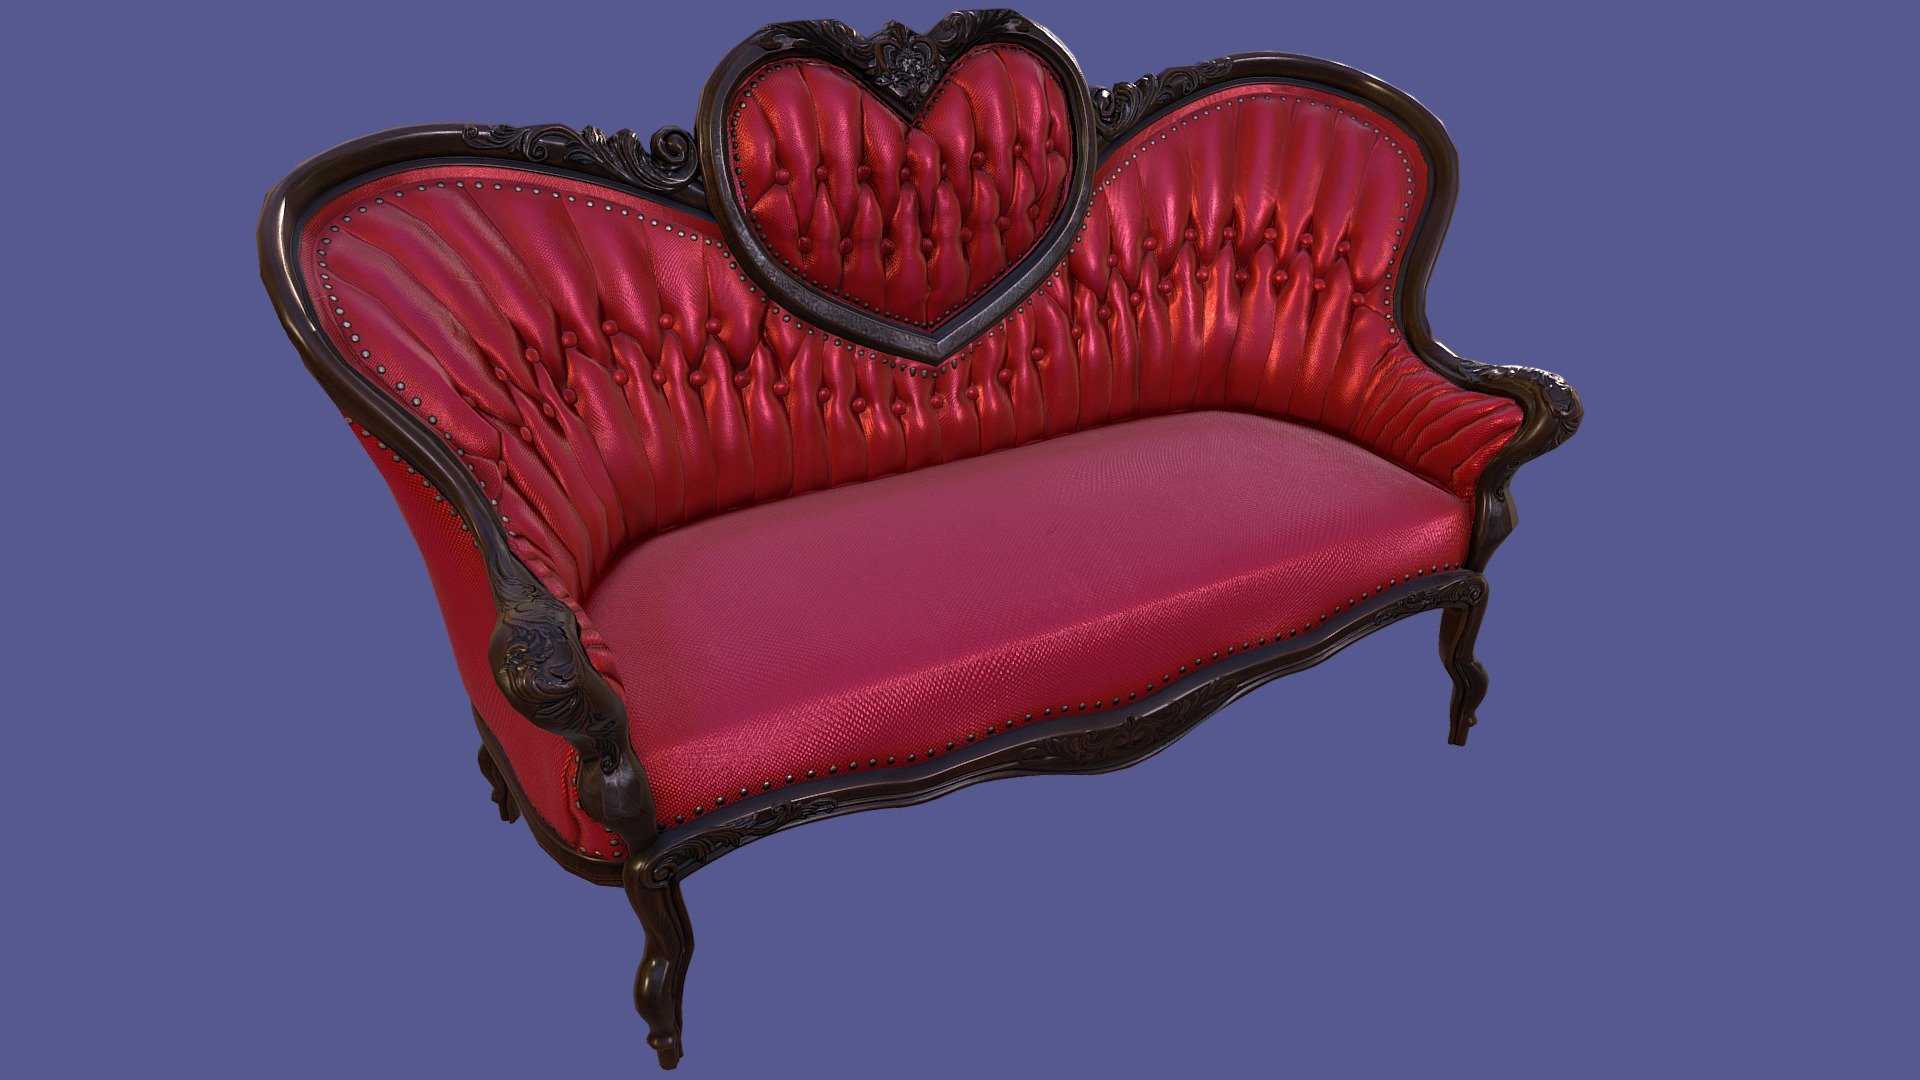 I was inspired by the Victorian &ldquo;Love Seats